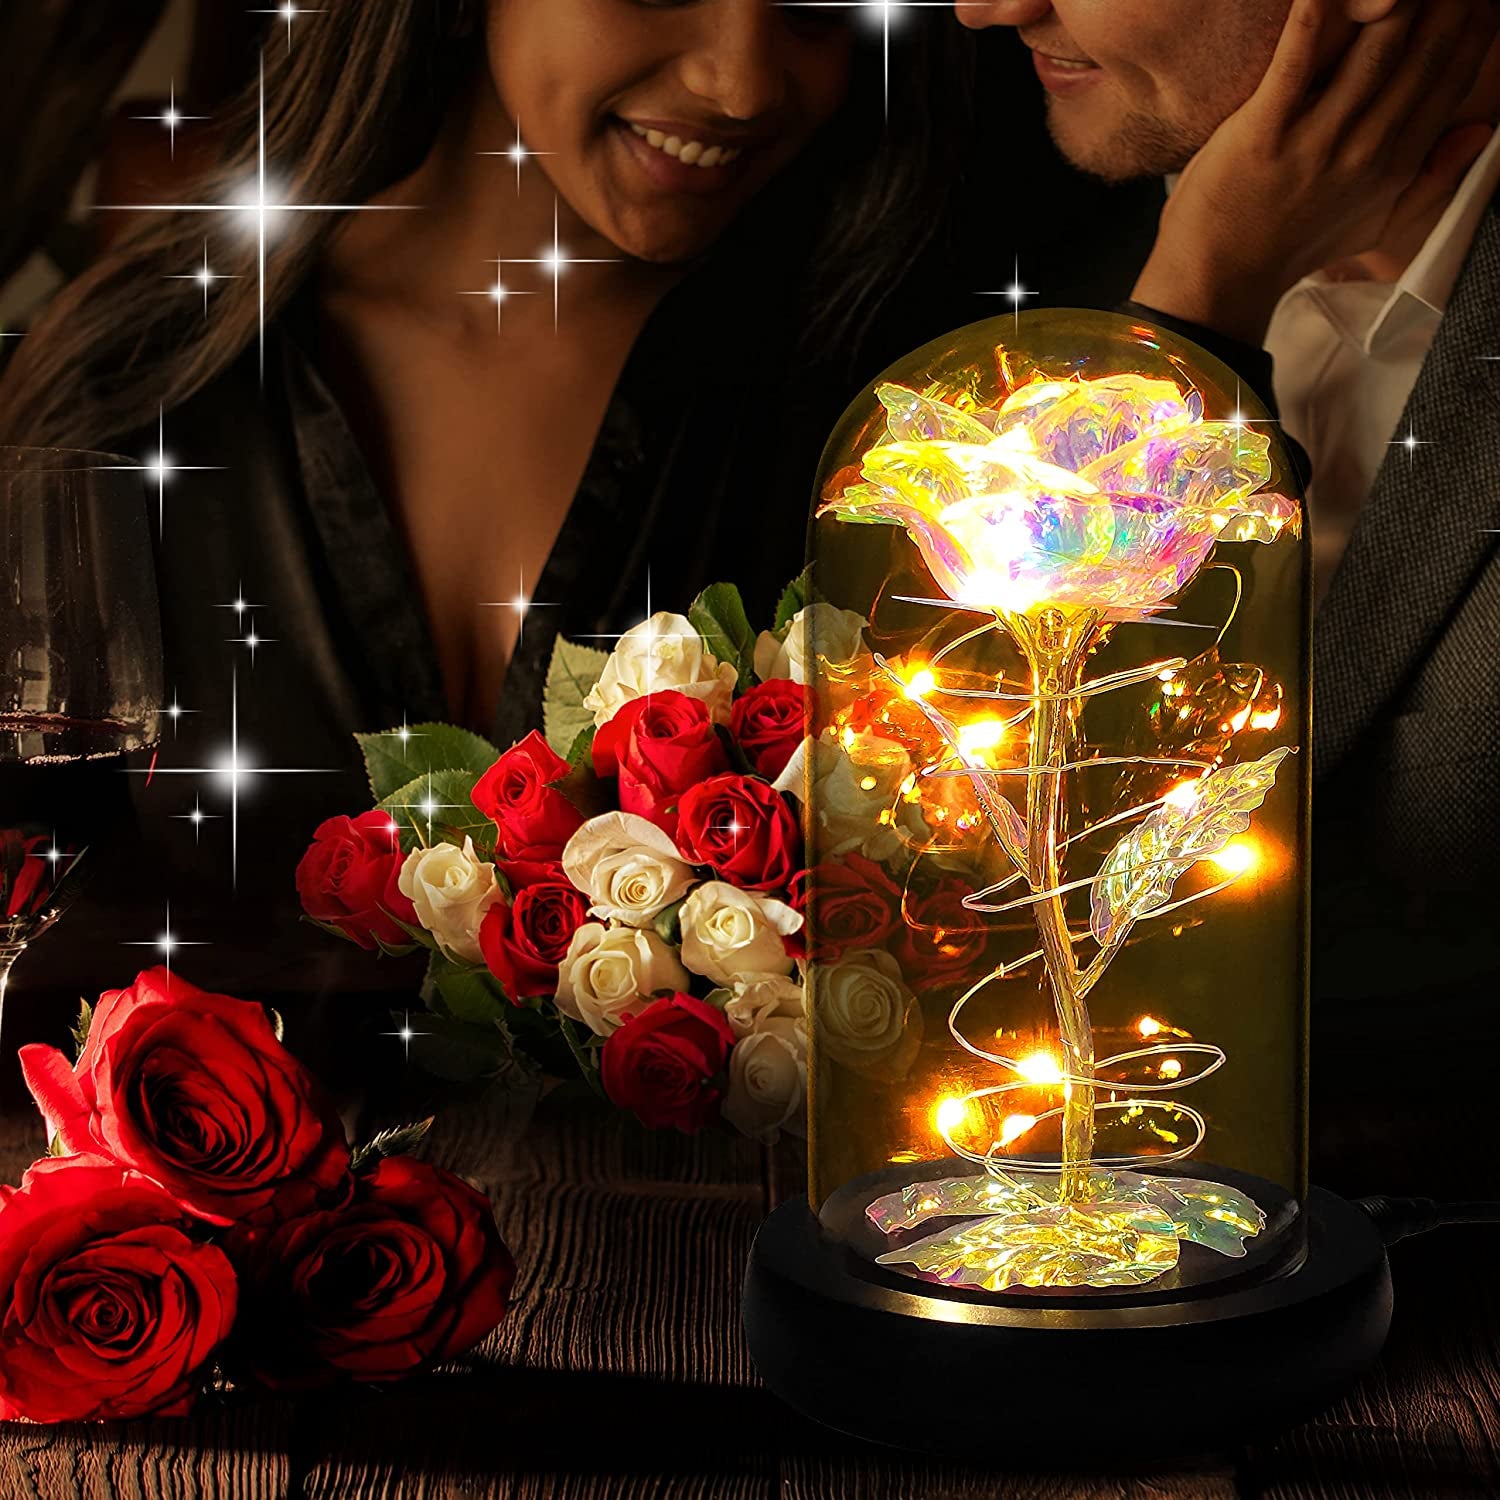 Birthday Gifts for Women,Valentines Day Gifts for Her,Womens Valentines Glass Rose Gifts for Mom,Light up Rose Flowers in Glass Dome,Colorful Rainbow Flower Rose Gifts for Wife,Mom,Girls,Anniversary